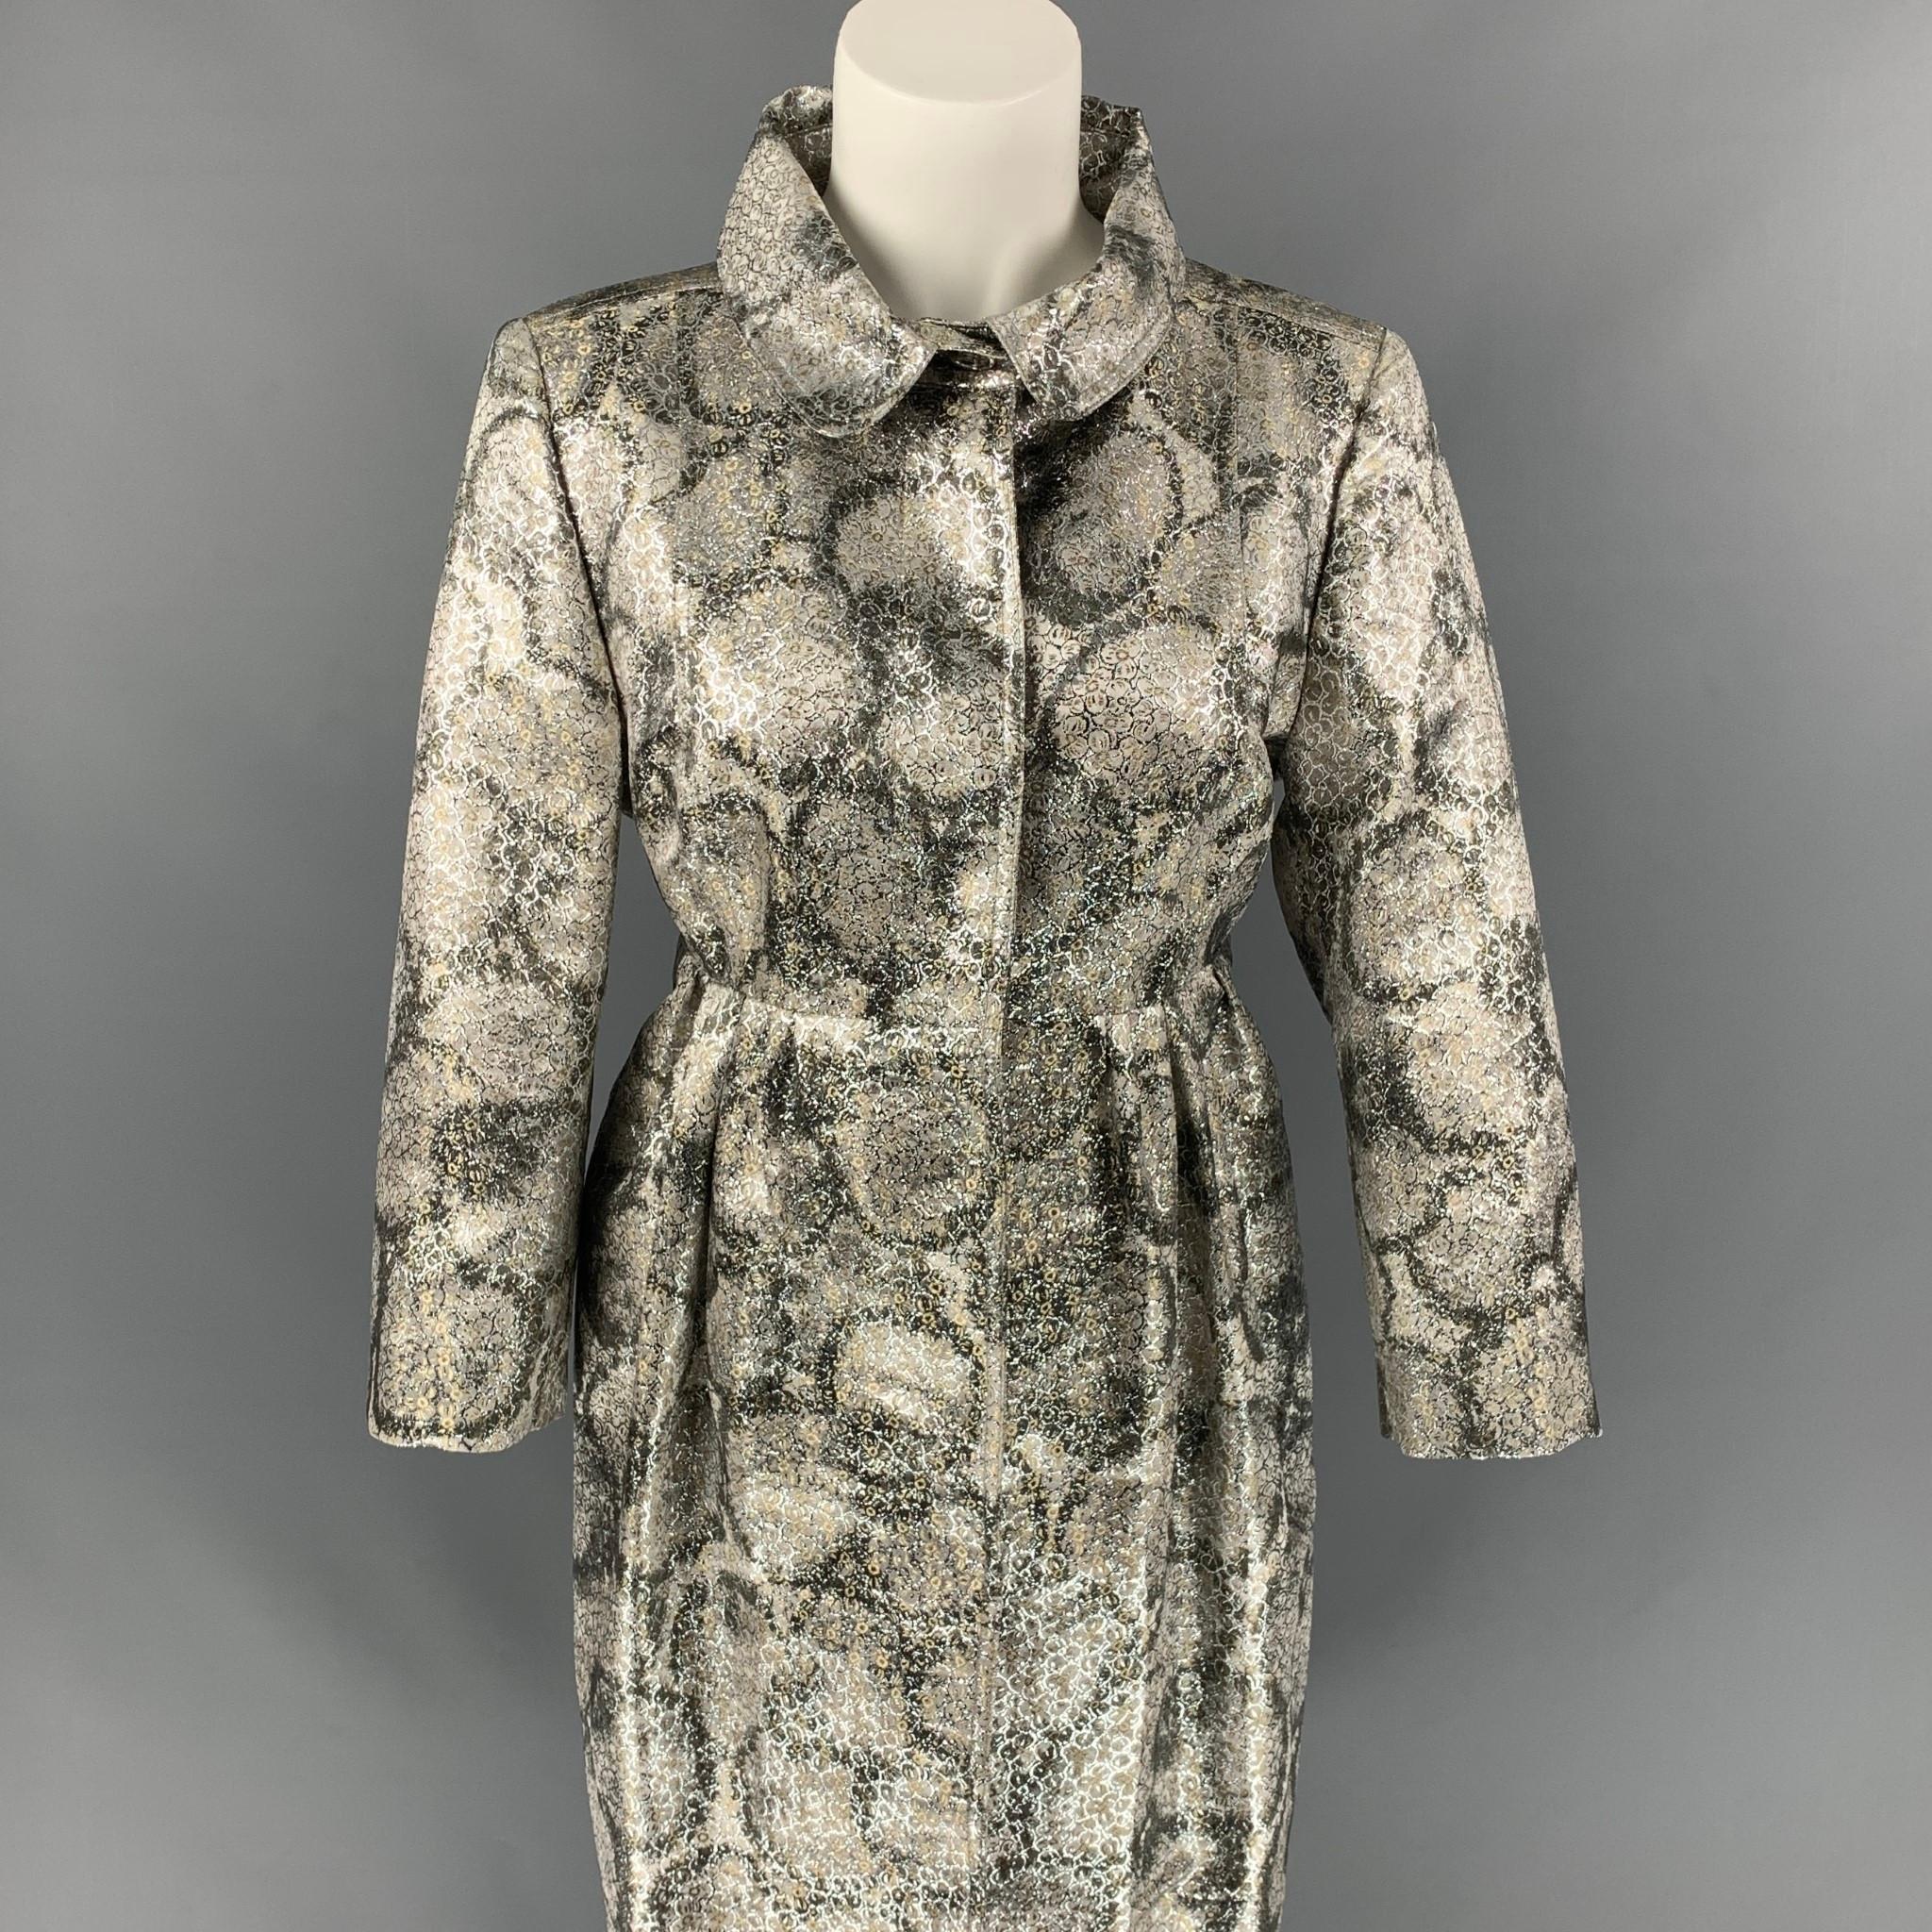 Early BURBERRY PRORSUM coat comes in a silver metallic jacquard silk blend with a full liner featuring an a-line silhouette, 3/4 sleeves, slit pockets, and a hidden snap button closure. Made in Italy. 

Very Good Pre-Owned Condition.
Marked: